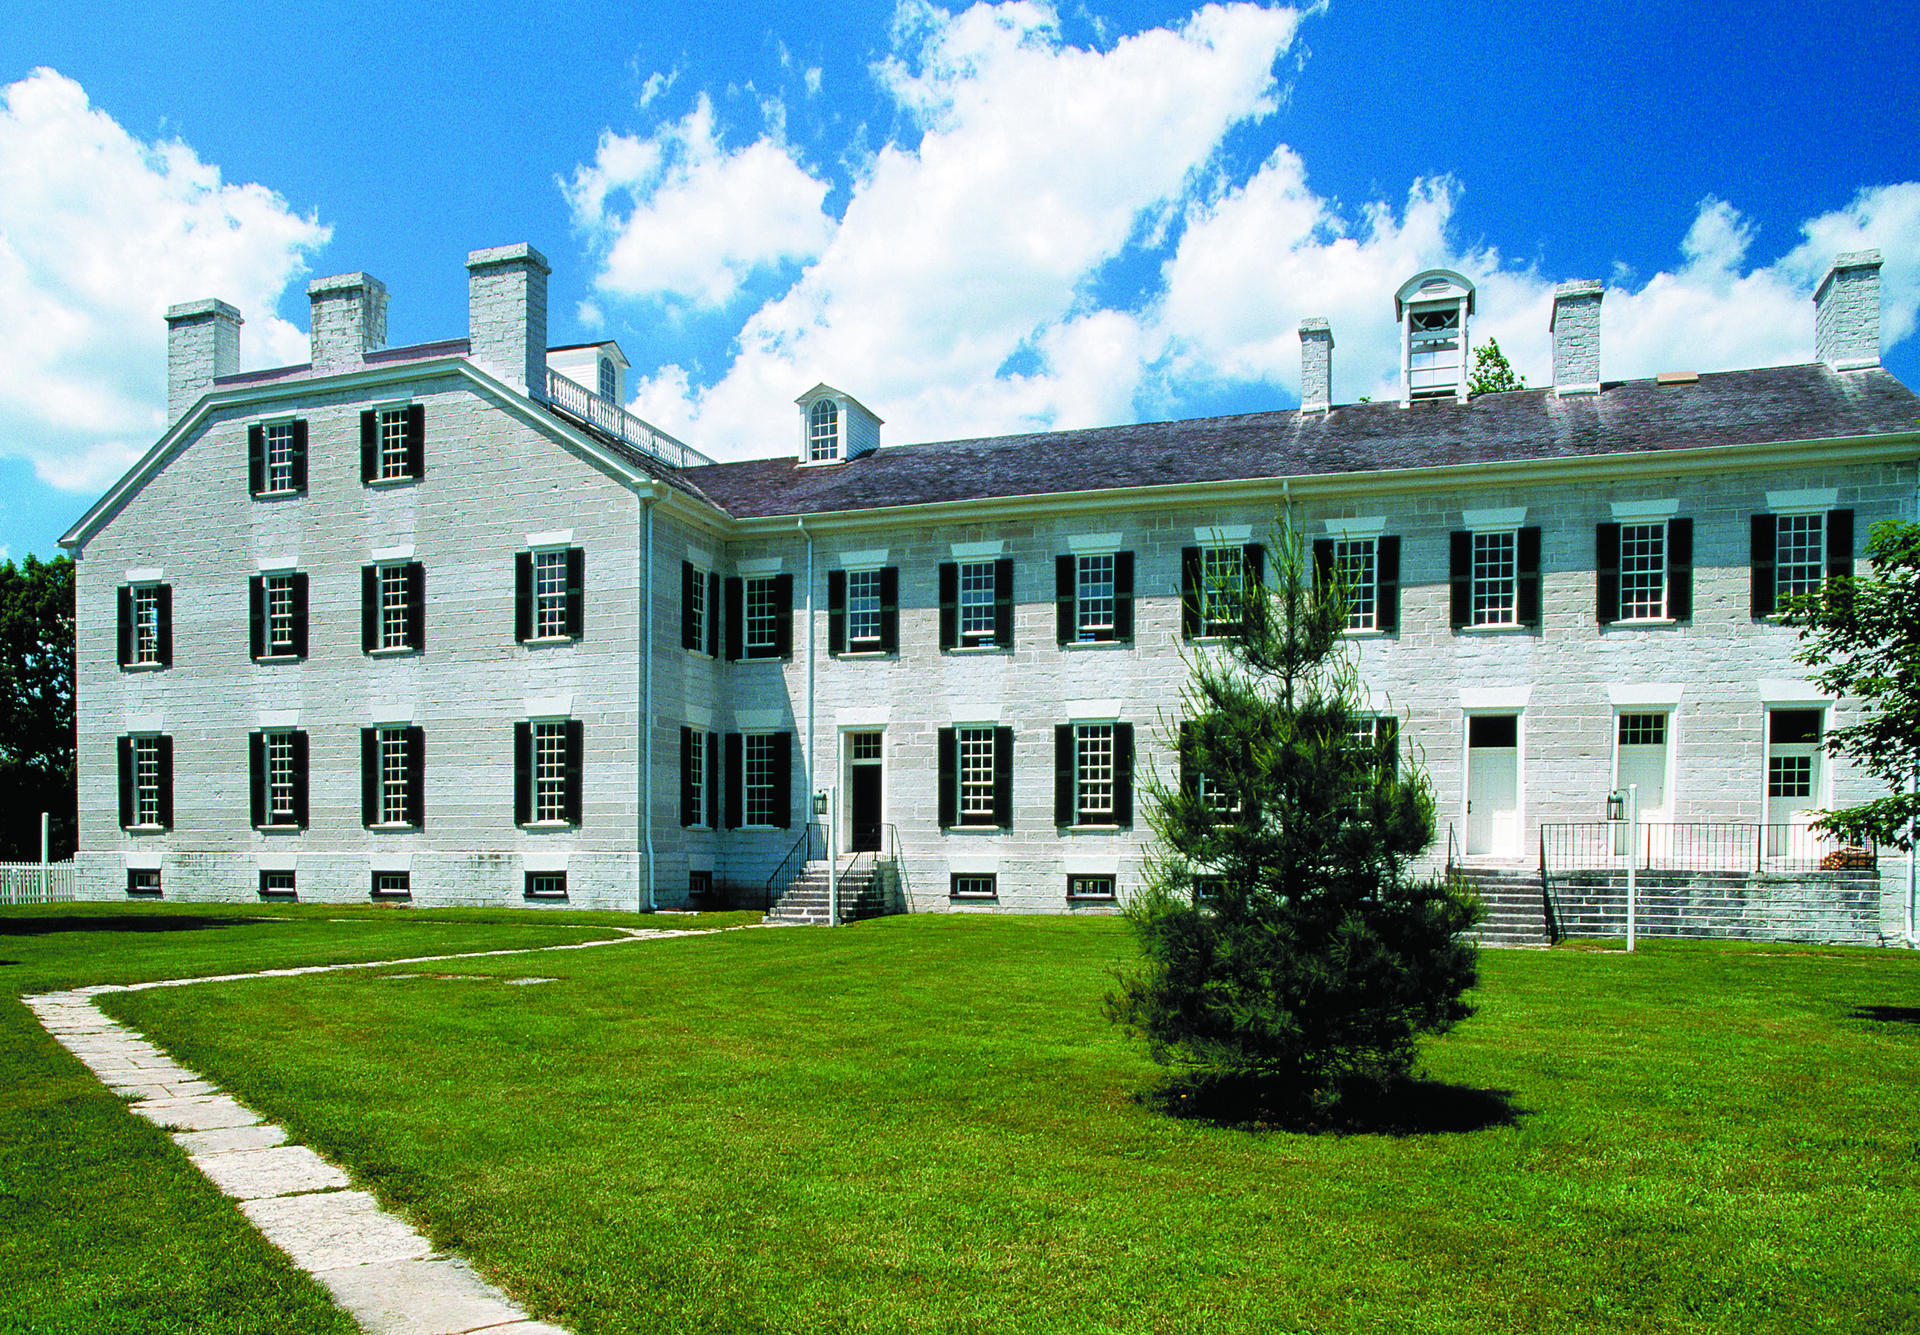 The Family Dwelling House at Shaker Village, Pleasant Hill, in the American state of Kentucky. Photos: Corbis; Buffalo Trace Distillery; Cecilie Gamst Berg